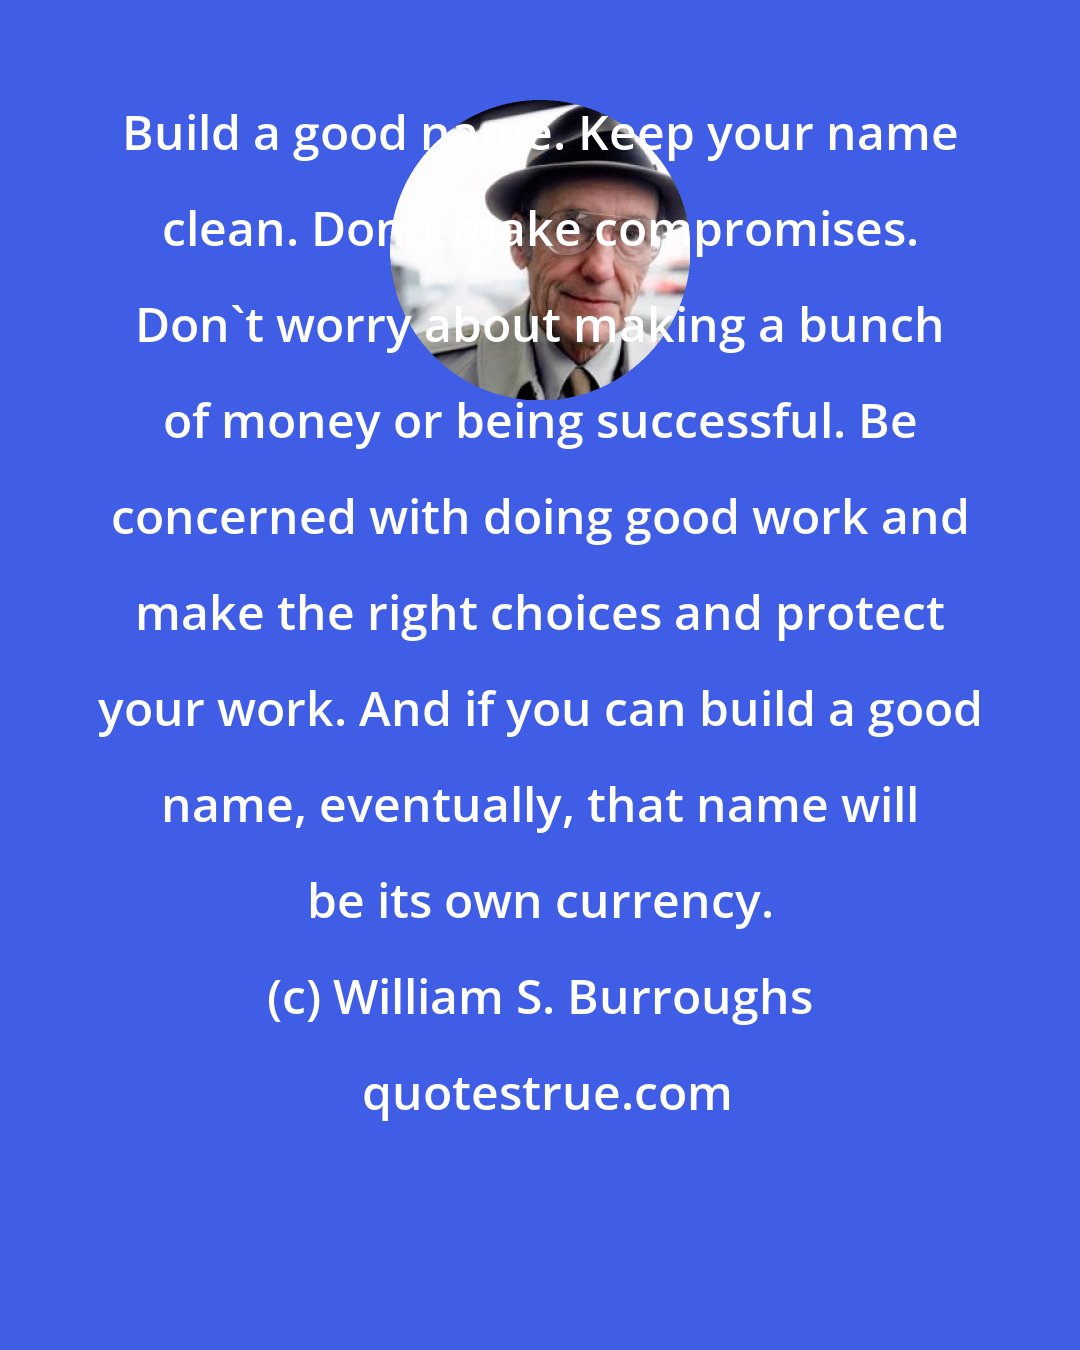 William S. Burroughs: Build a good name. Keep your name clean. Don't make compromises. Don't worry about making a bunch of money or being successful. Be concerned with doing good work and make the right choices and protect your work. And if you can build a good name, eventually, that name will be its own currency.